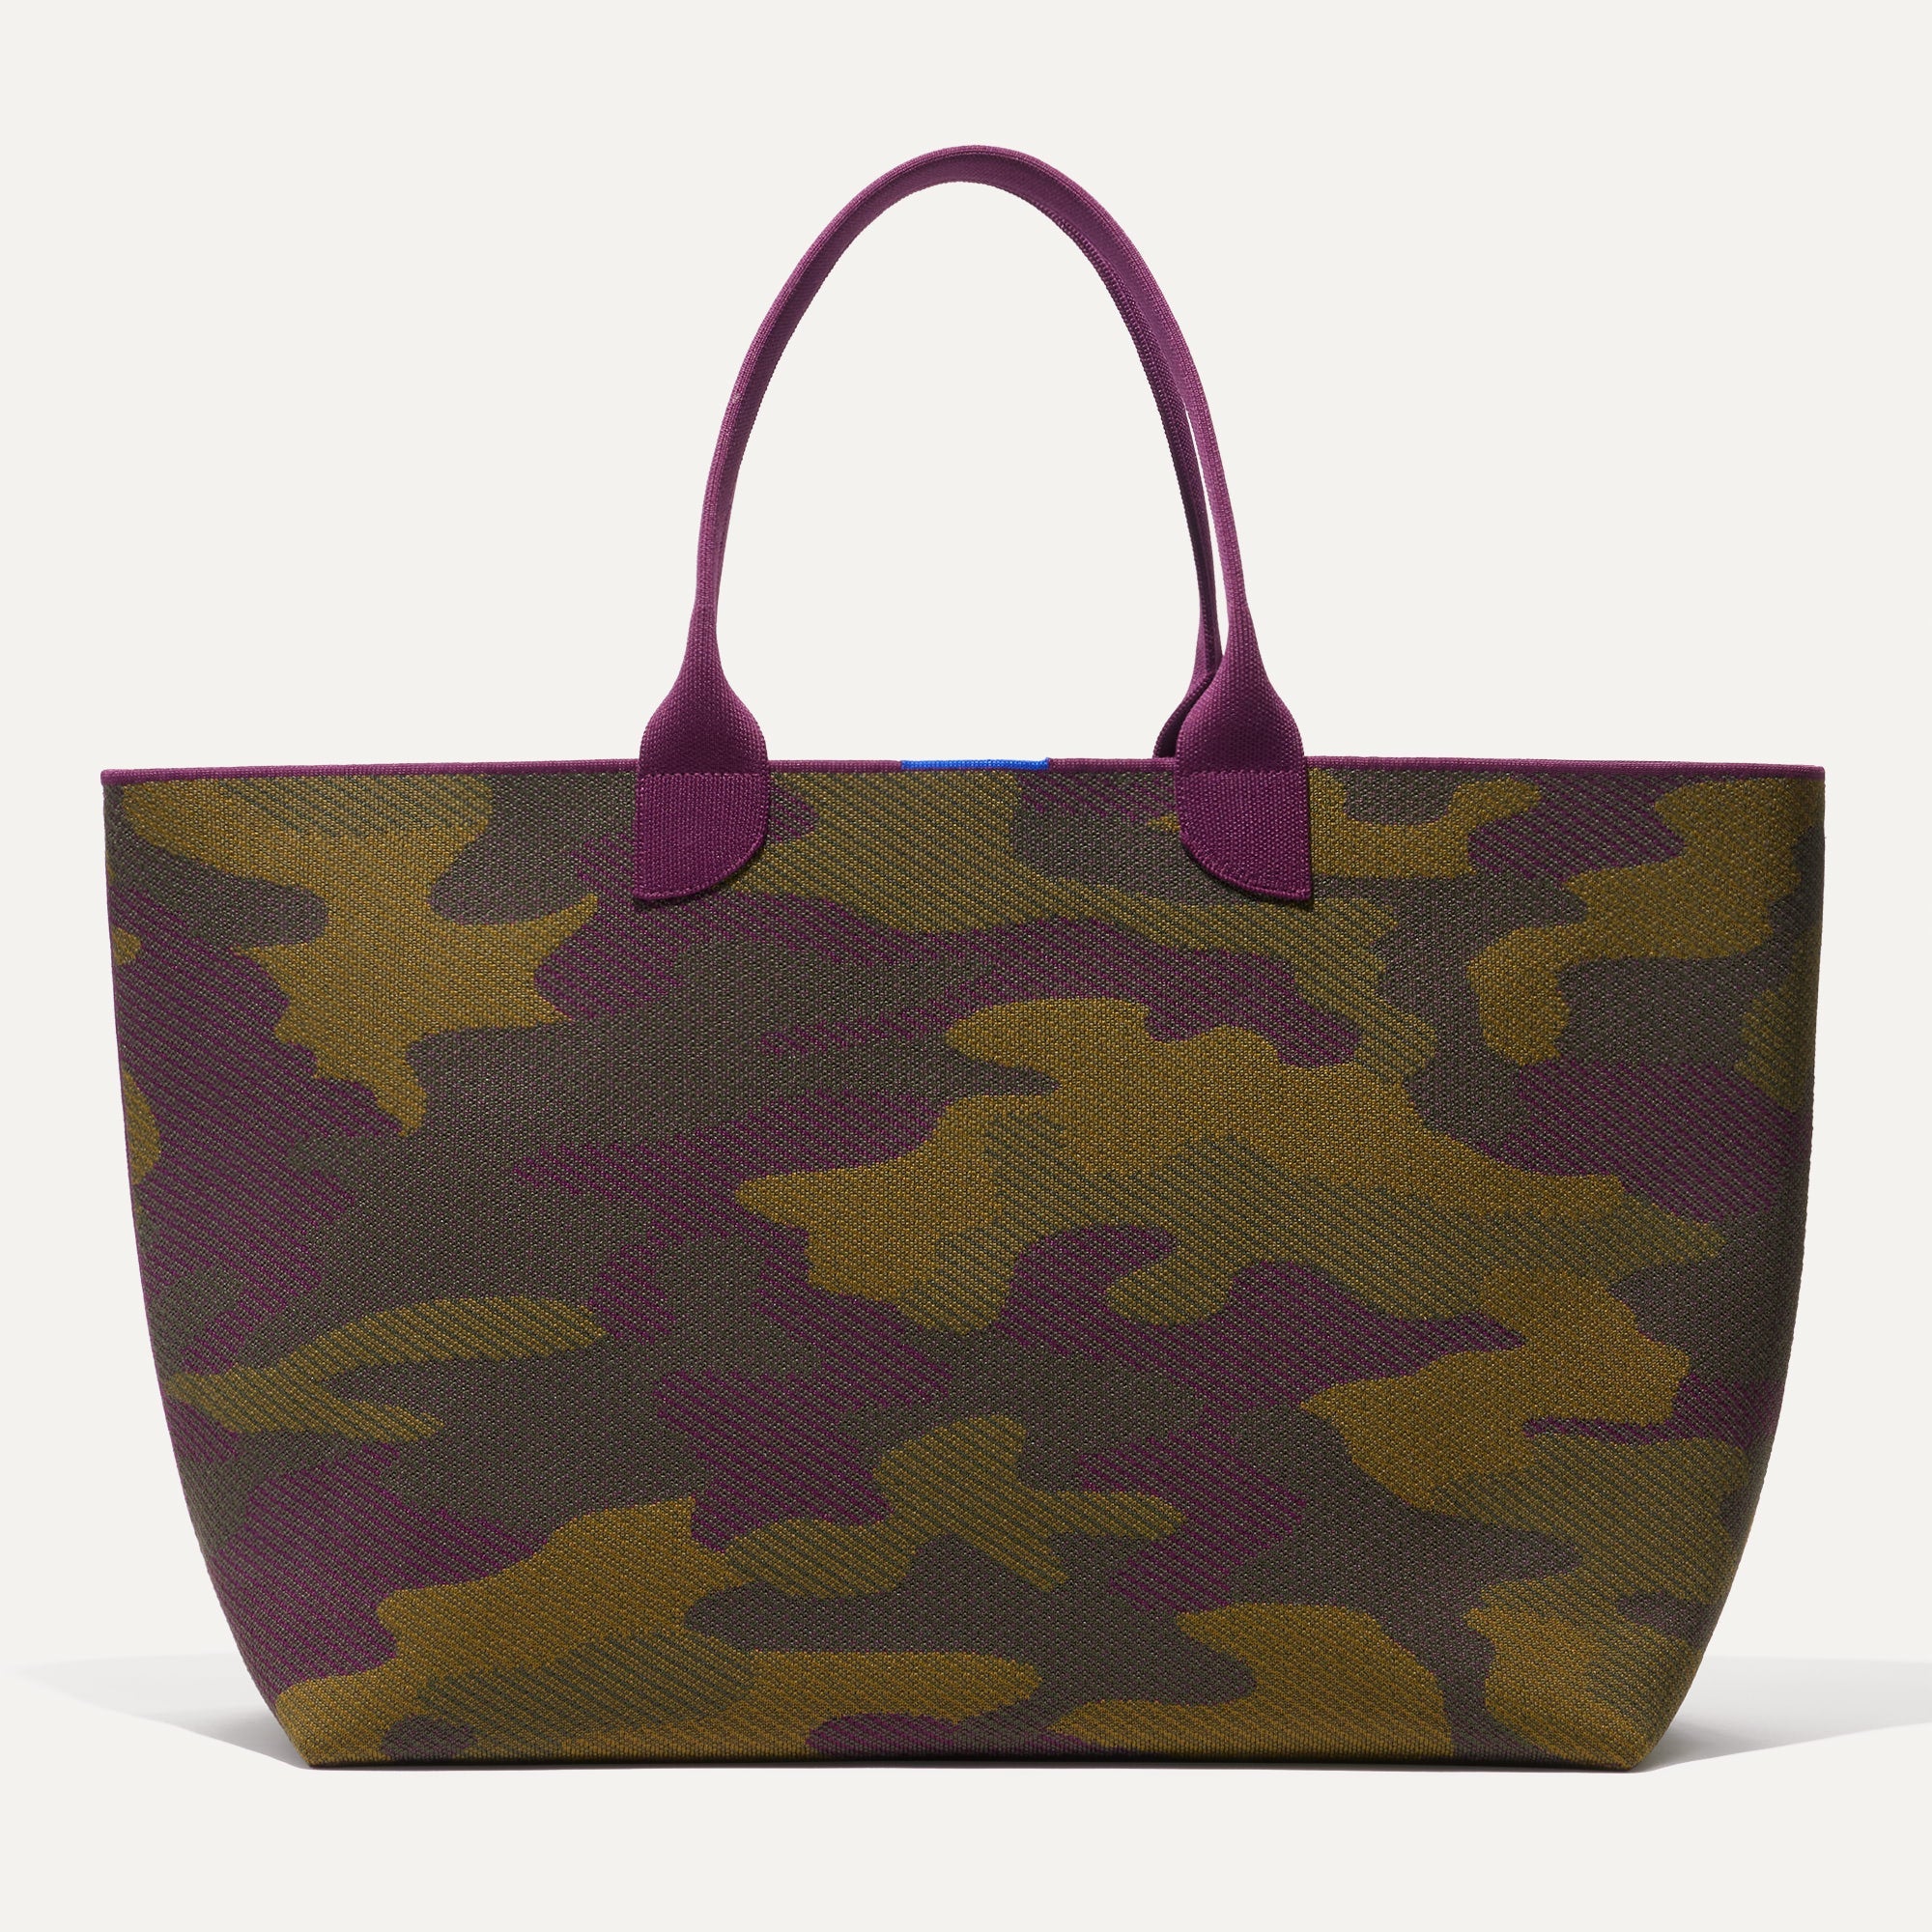 Rothy's - The Lightweight Mega Tote in Green